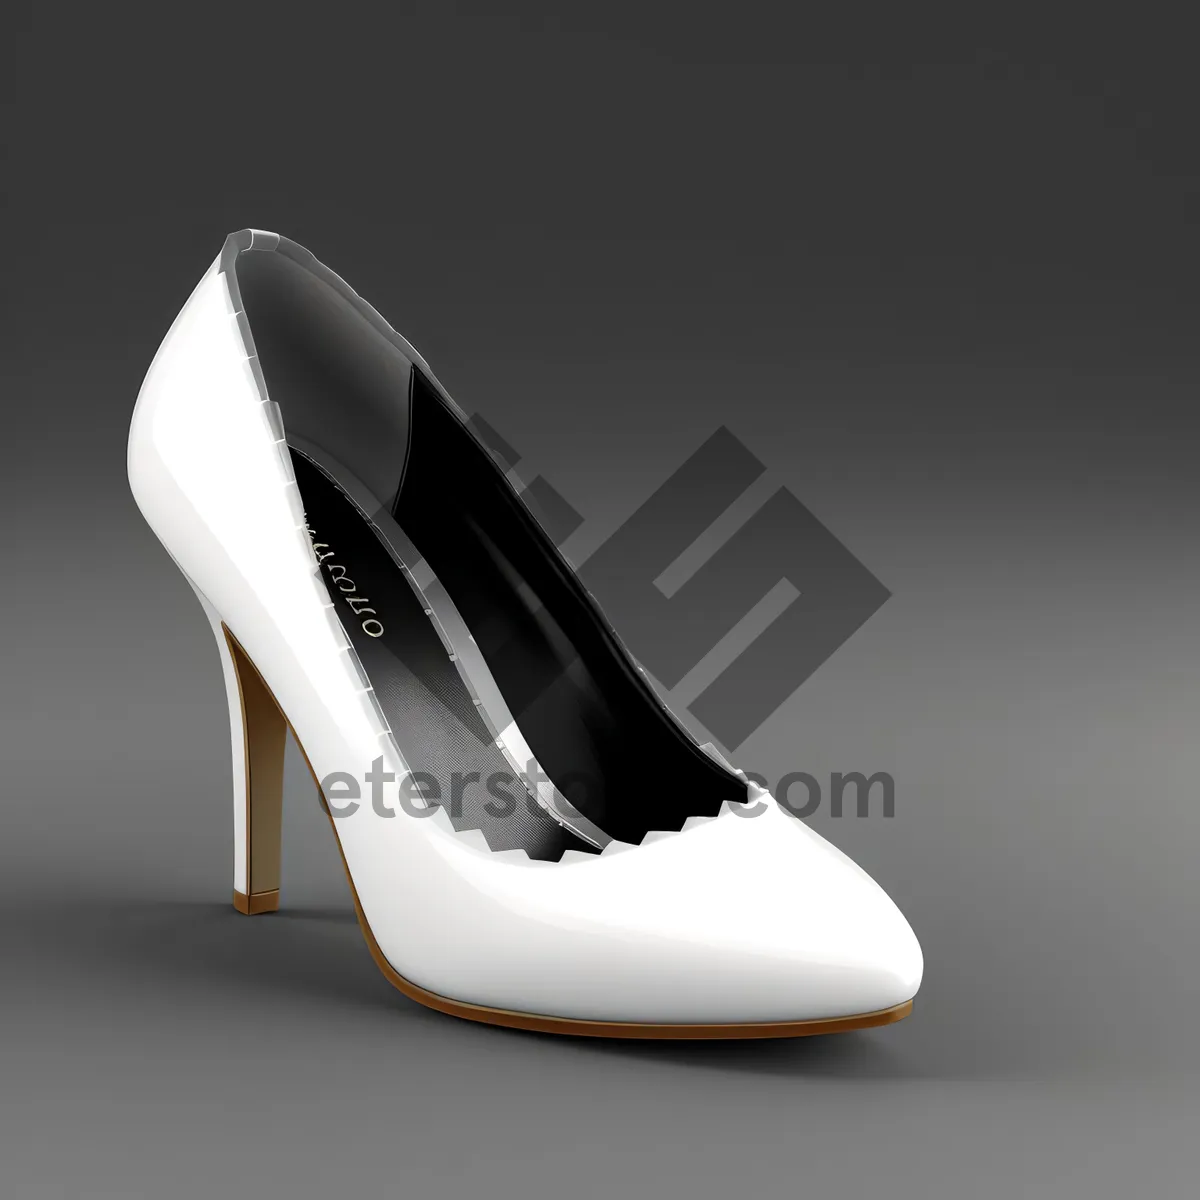 Picture of Stylish Leather Footwear with Shiny Black Heels